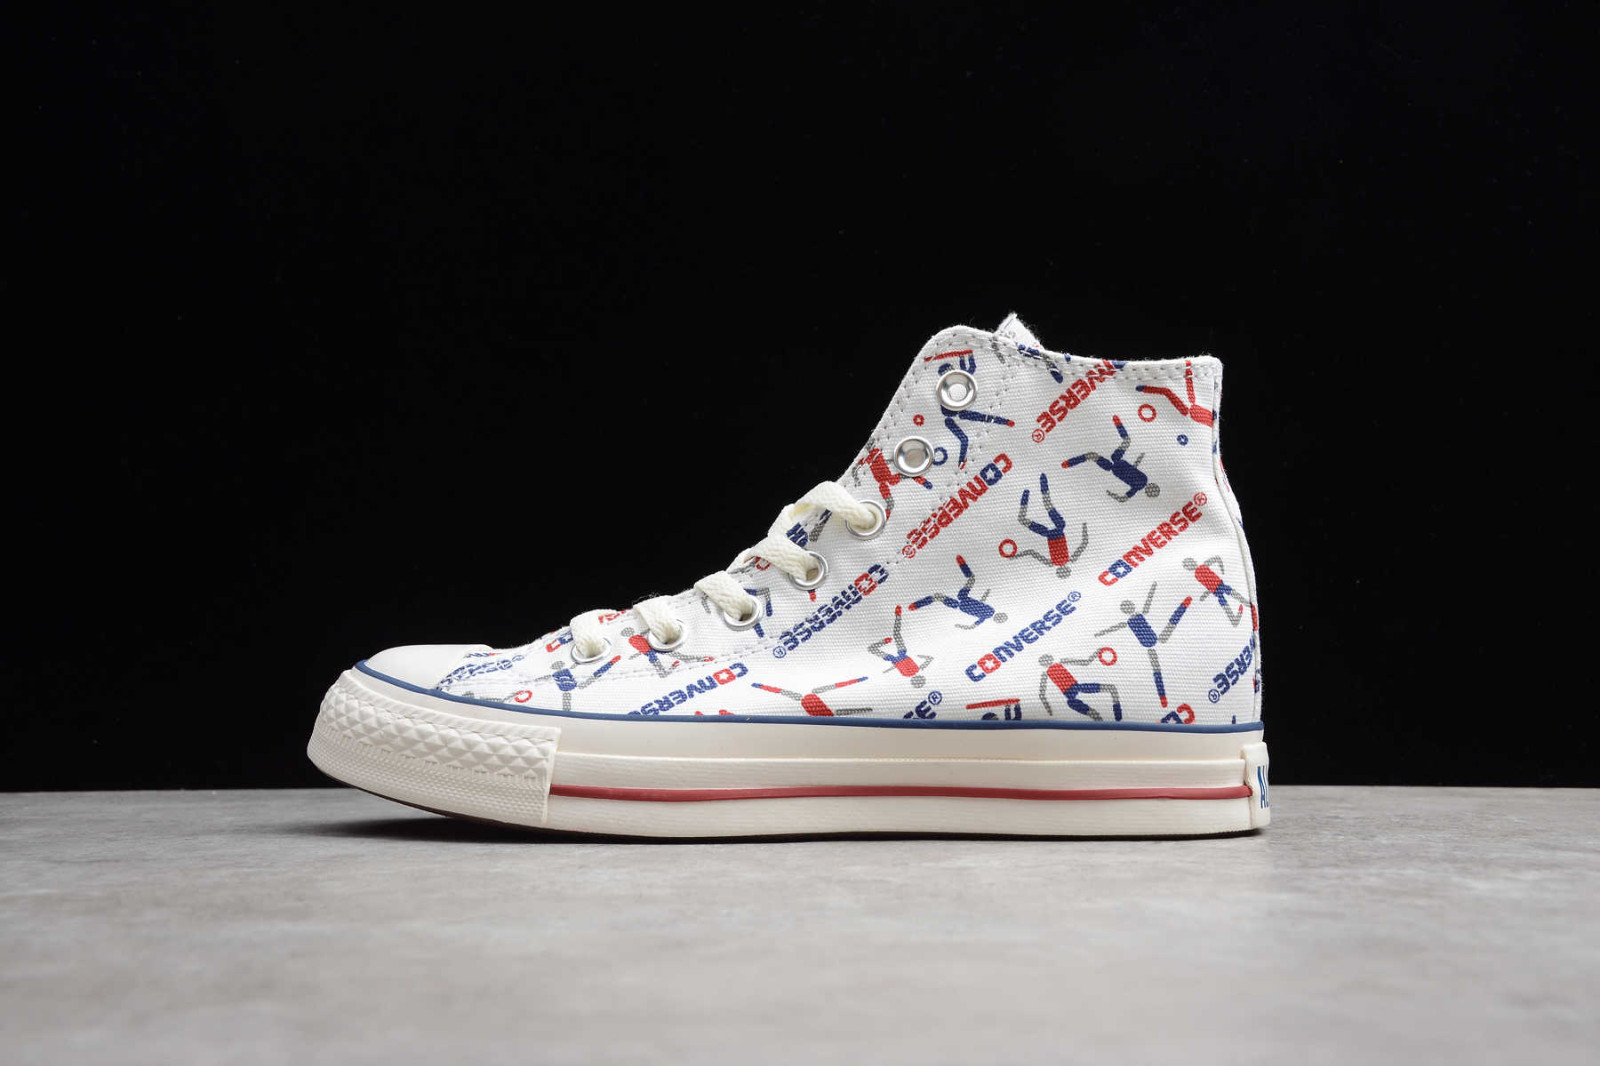 MultiscaleconsultingShops - Converse Chuck Taylor All-Star Hi